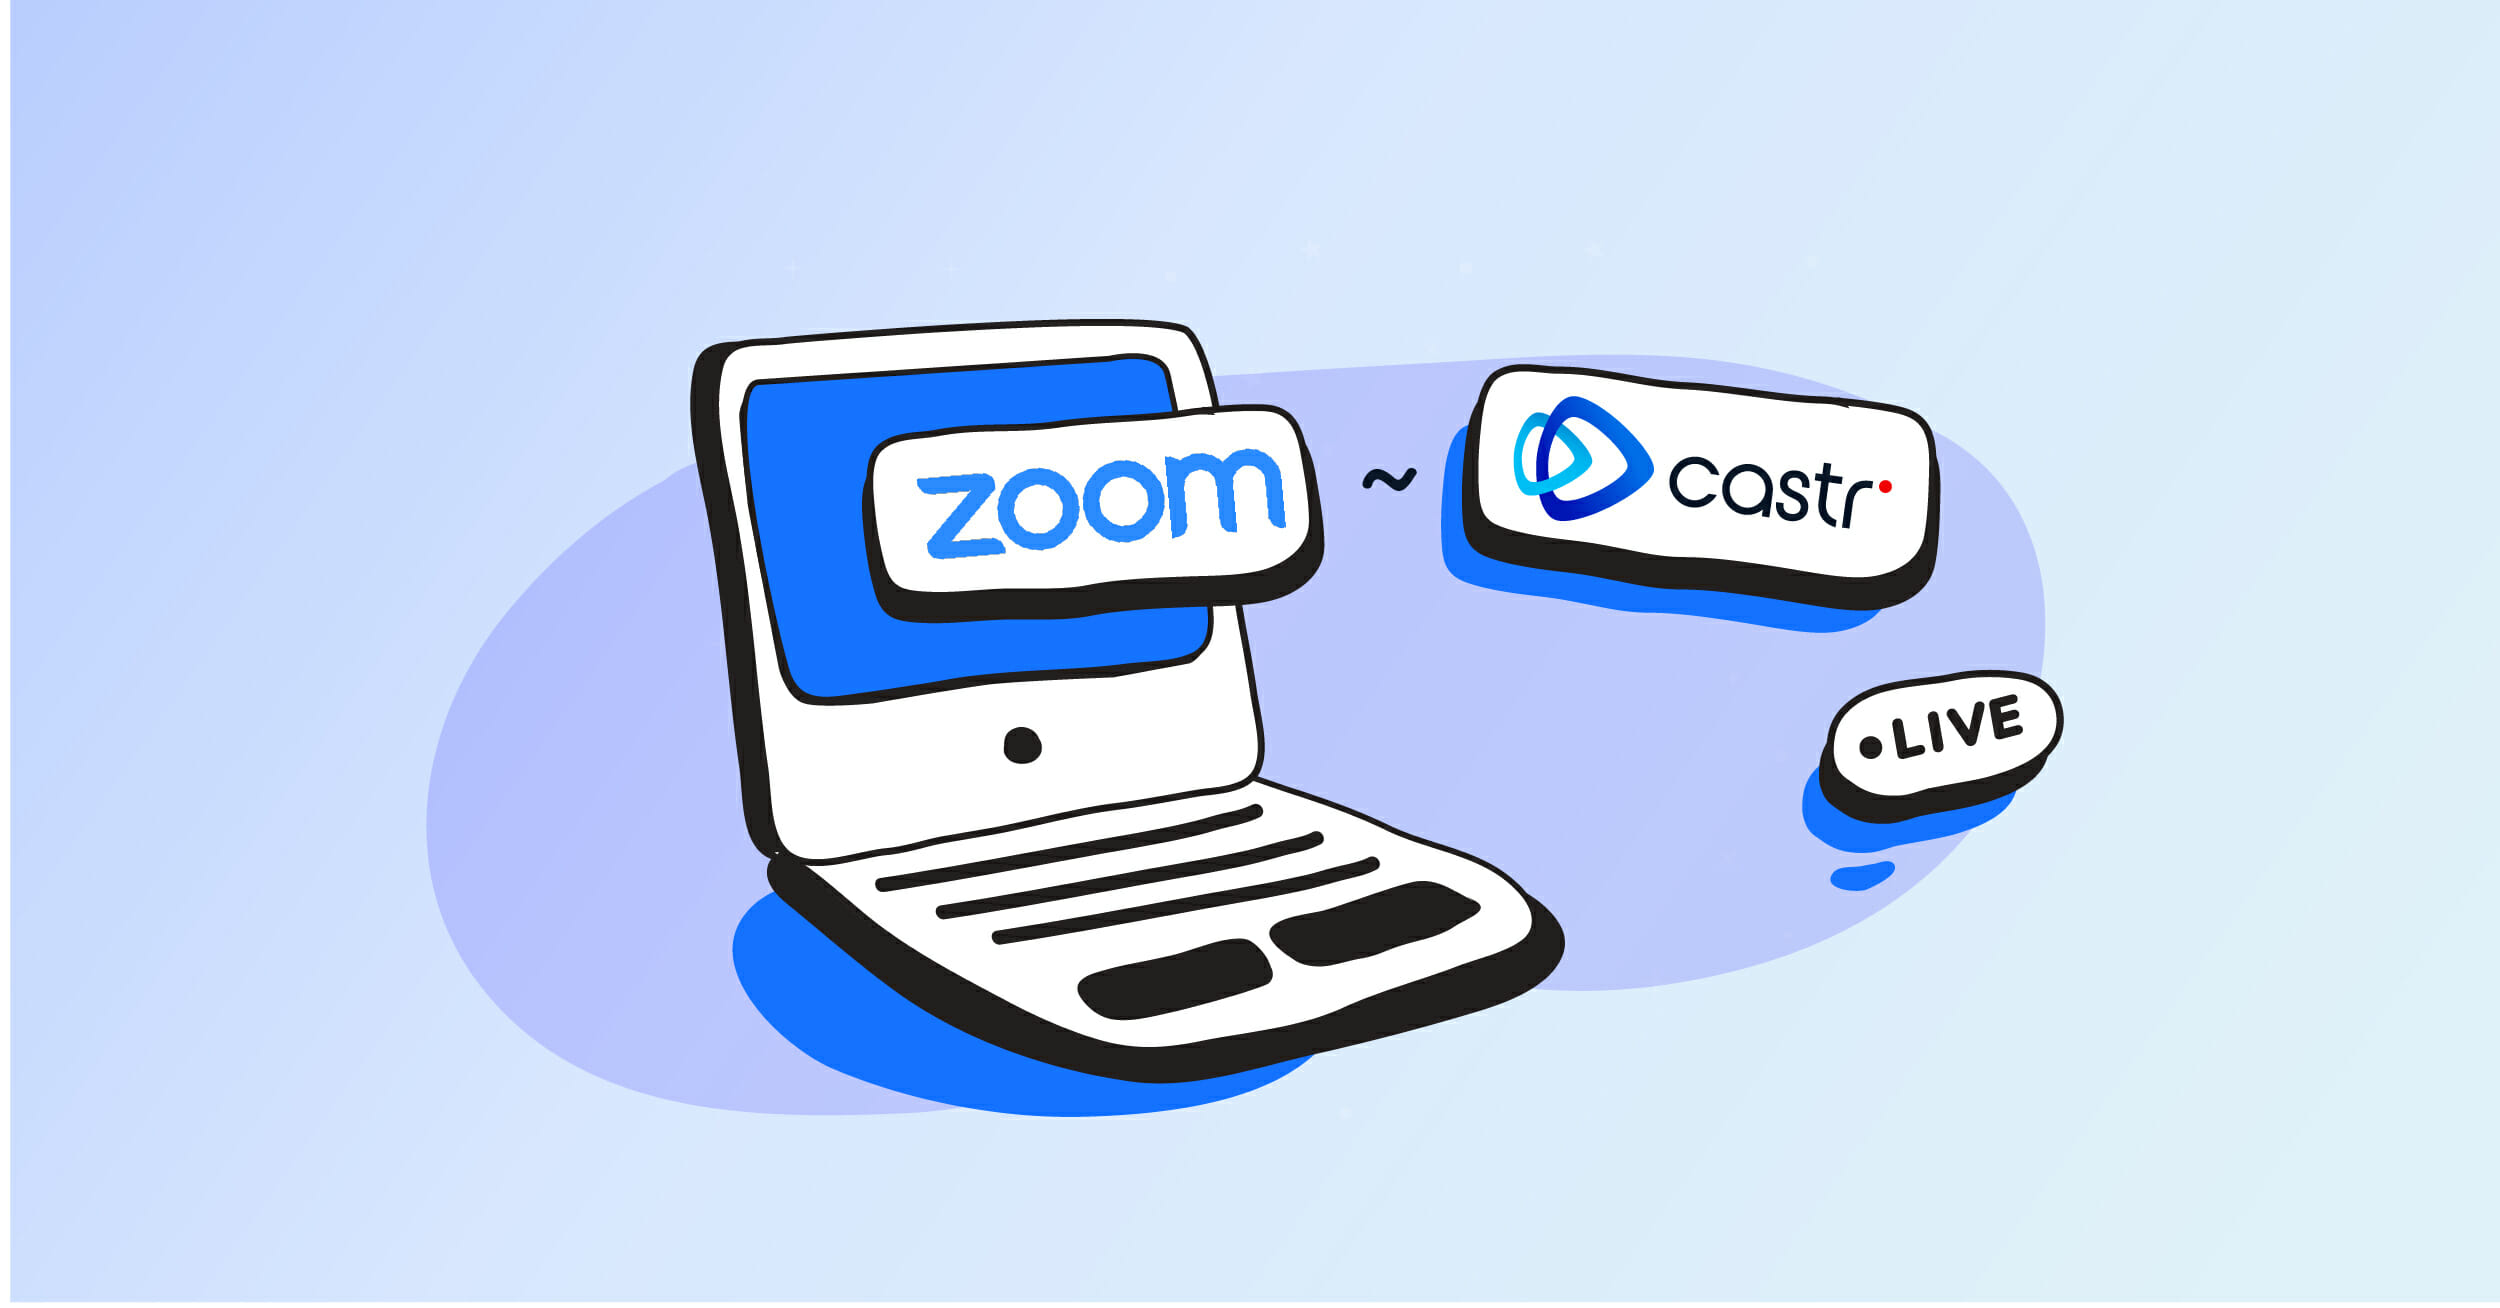 How to connect Zoom with Castr